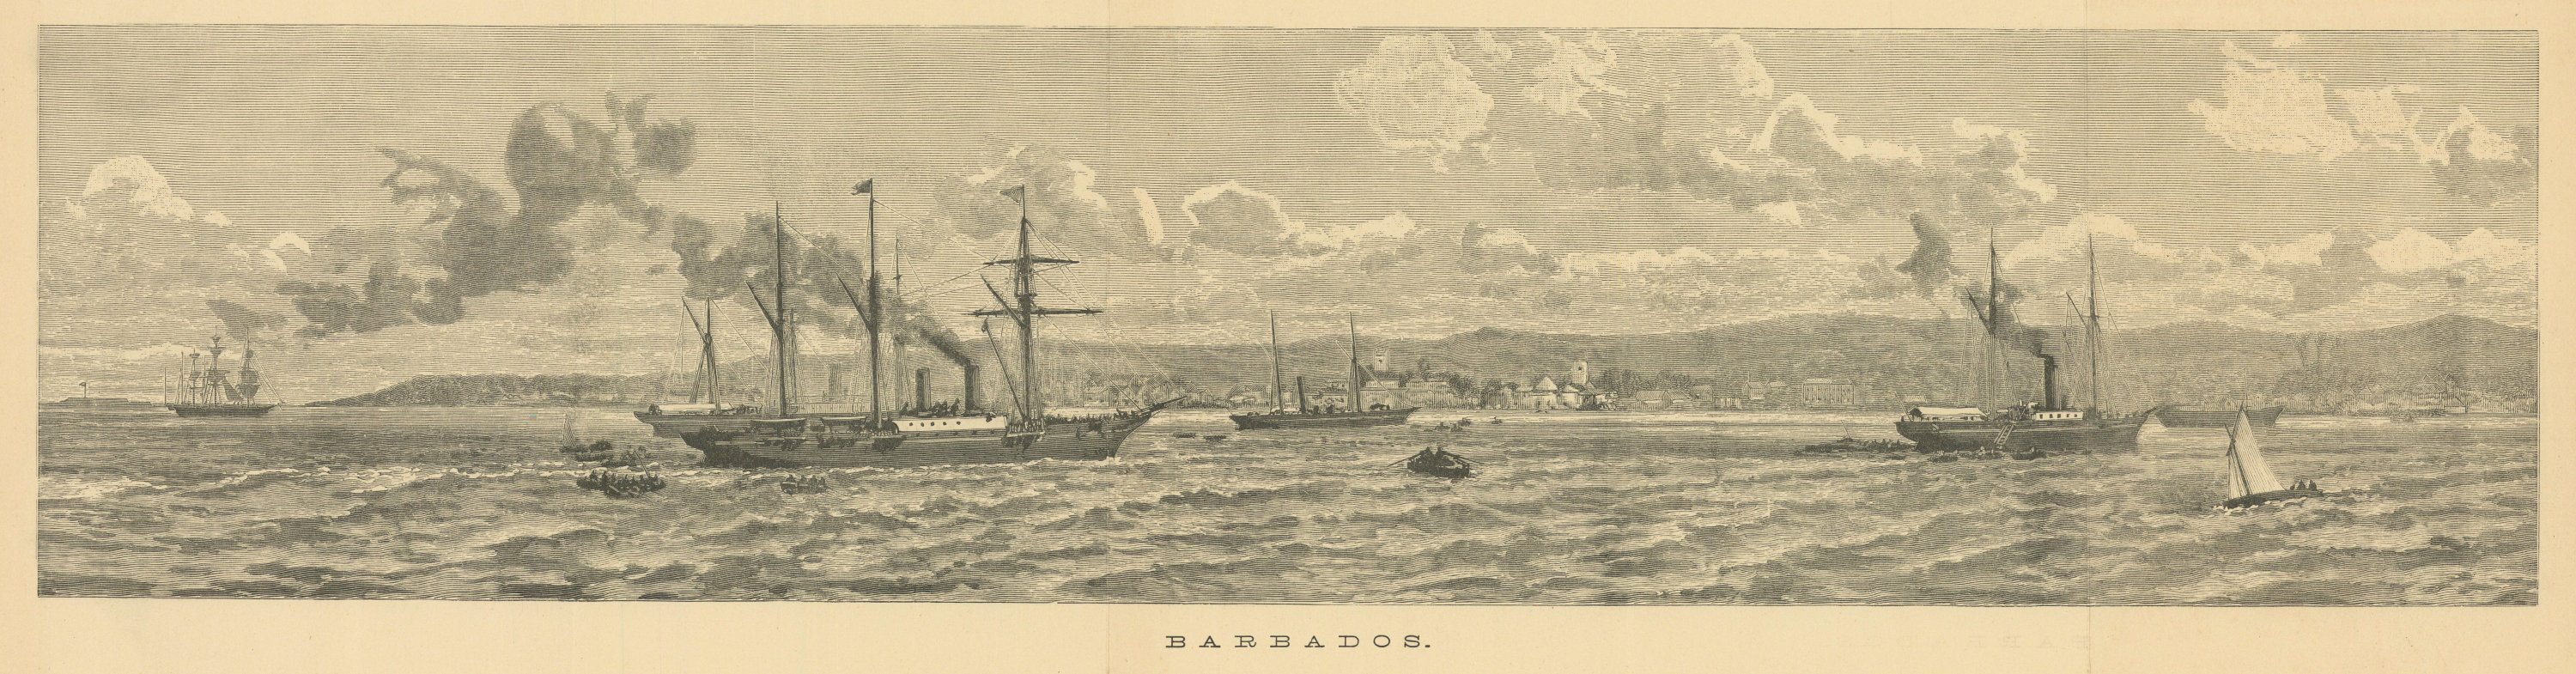 Barbados. Panorama of Bridgetown from the sea 1889 old antique print picture